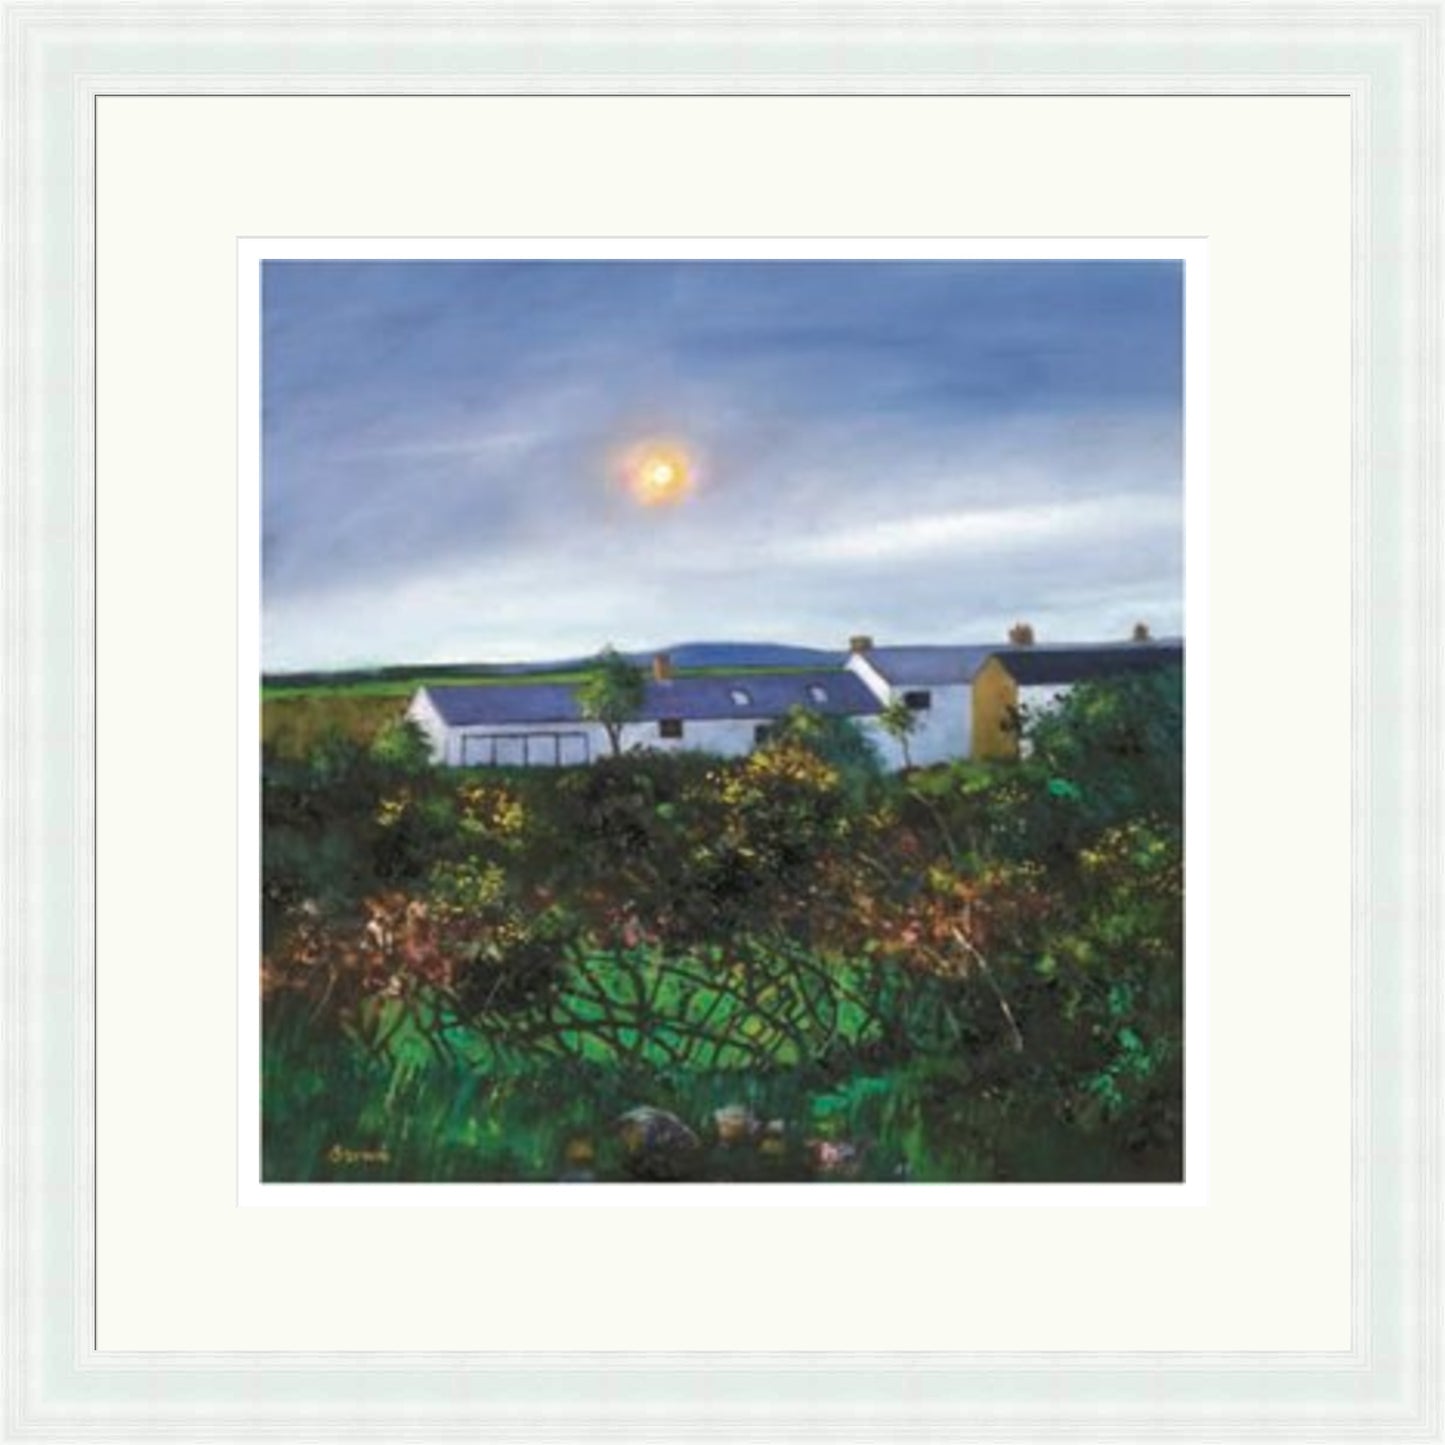 Cornish Cottages (Signed Limited Edition) by Davy Brown